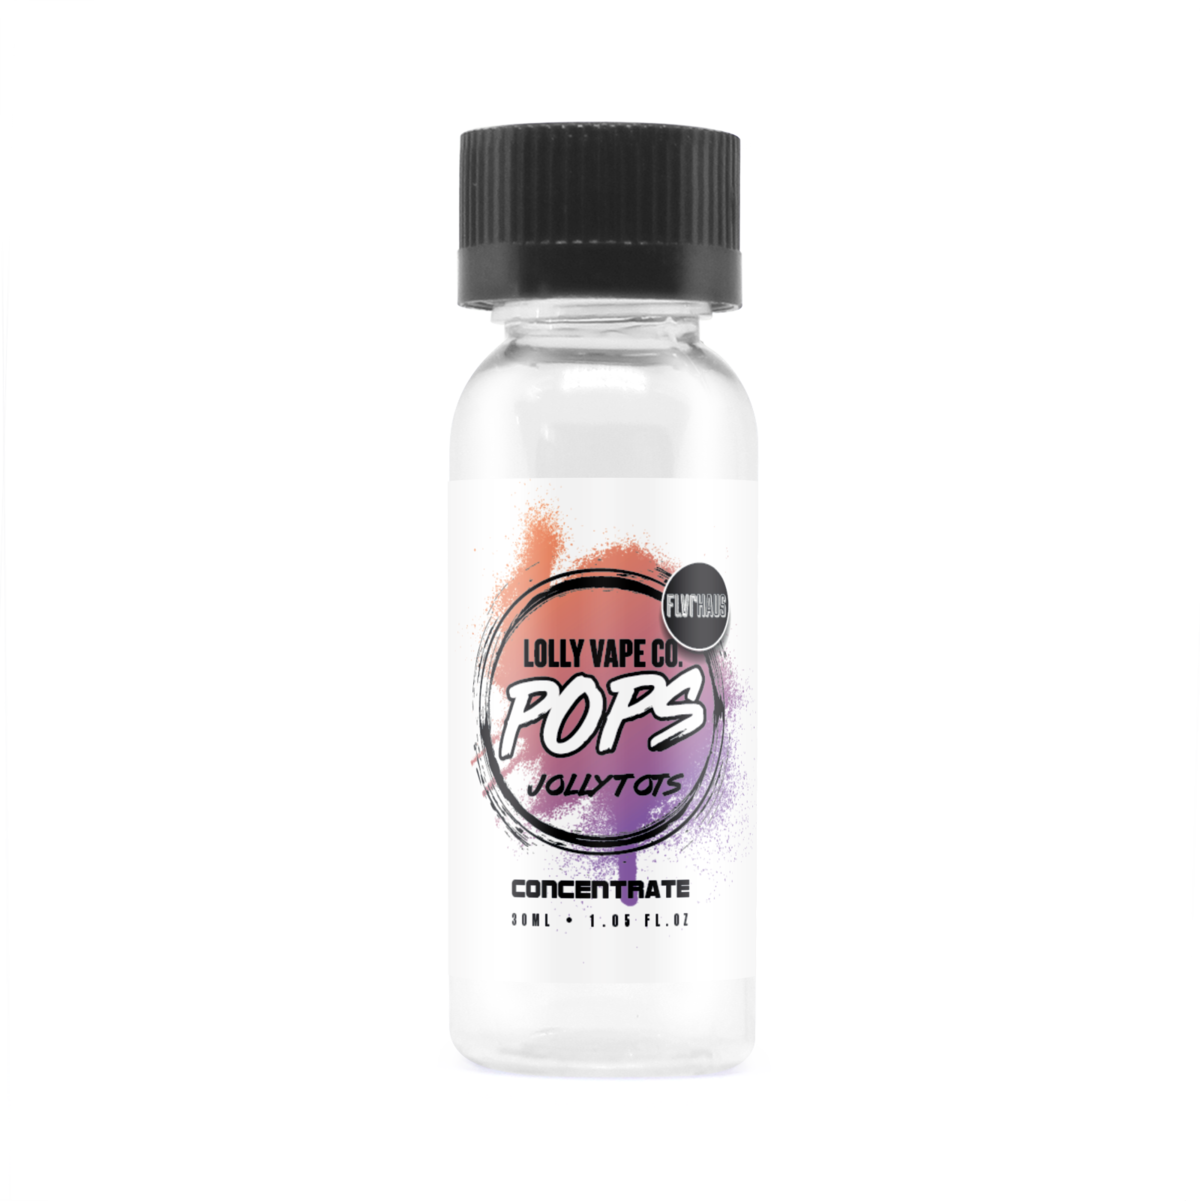 Jolly Tots Concentrate E-liquid by Lolly Vape Co 30ml